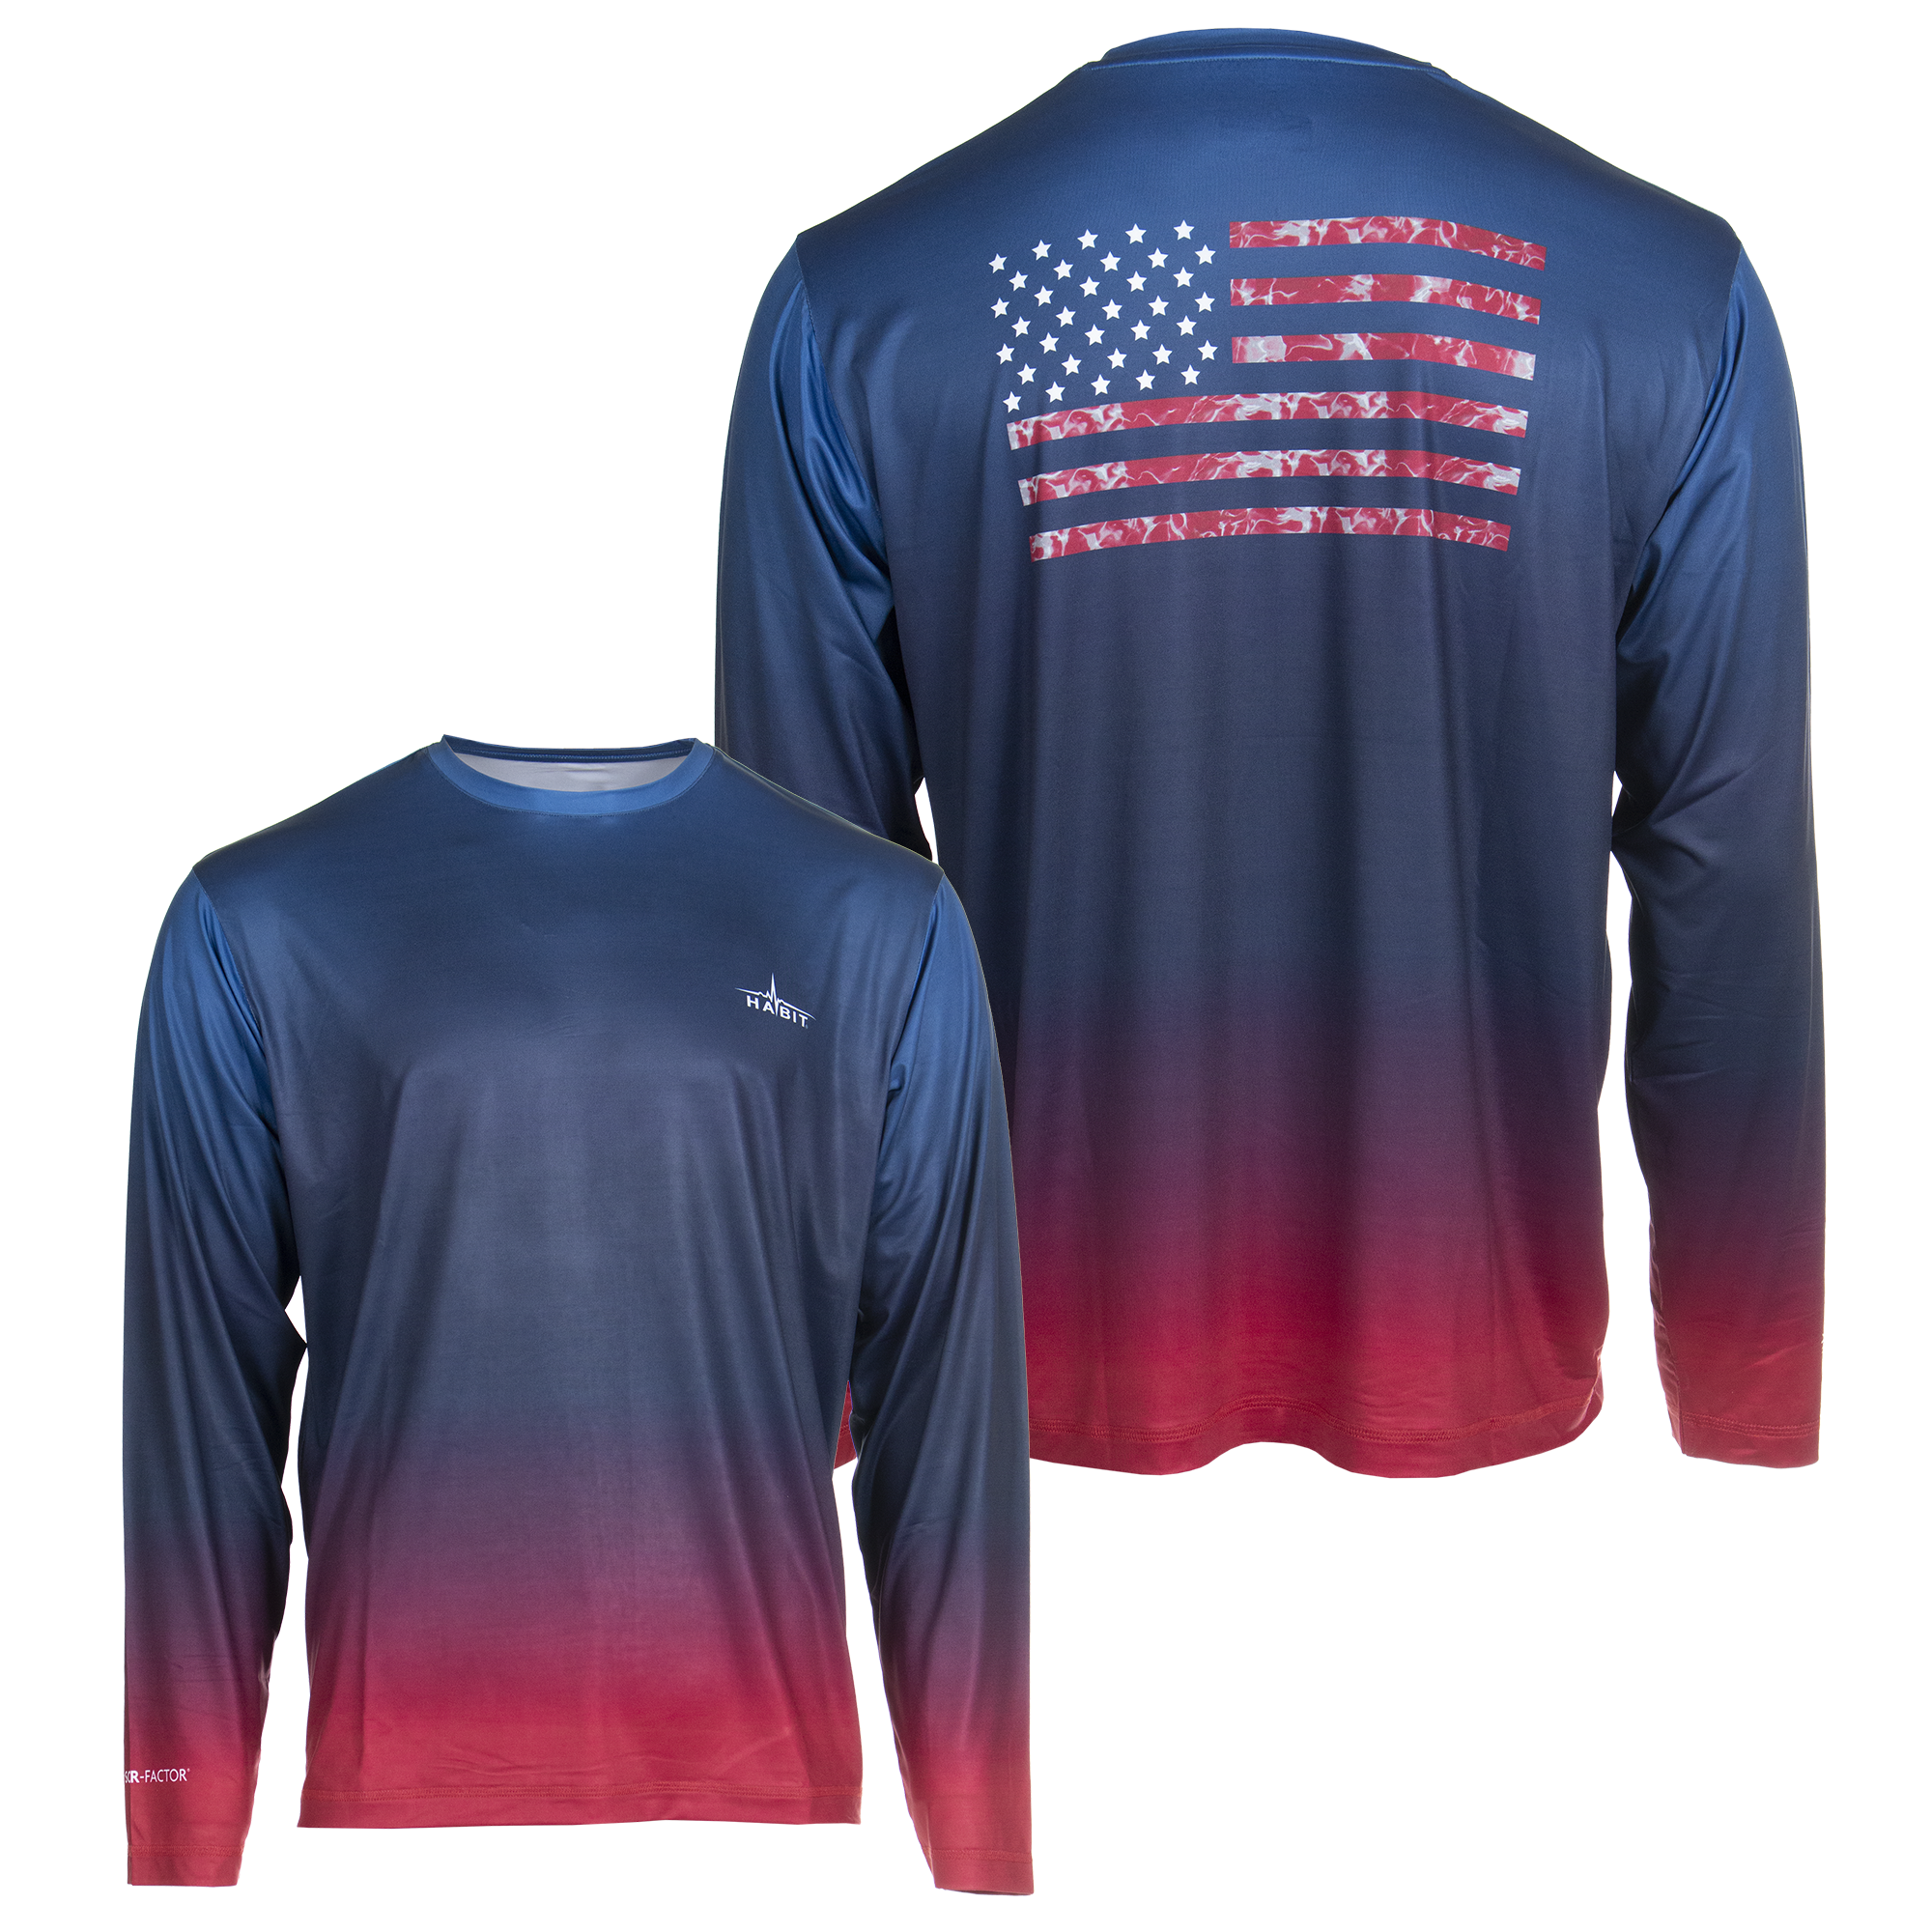 Habit Seagrass Cove Long Sleeve Quick Dry UPF 40+ Performance Tee (Red American, XL), Men's